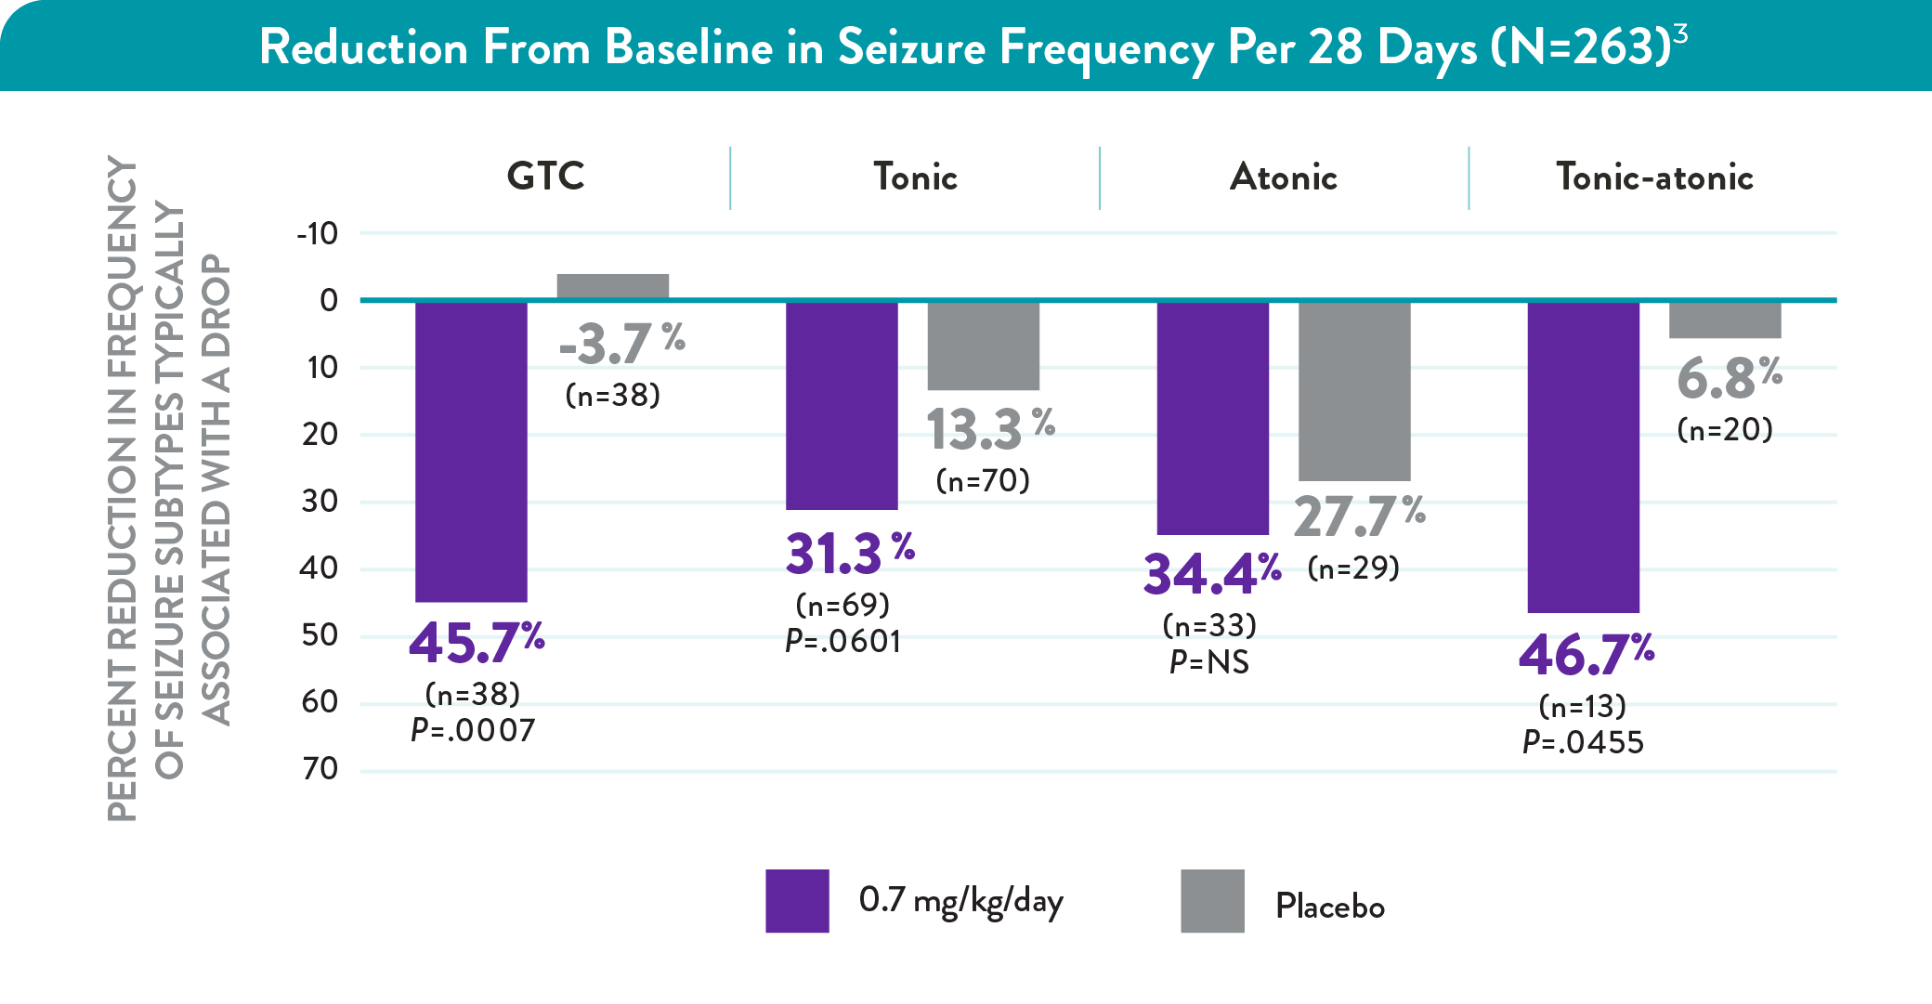 Graph showing the reduction from baseline in seizure frequency per 28 days in patients with Lennox-Gastaut syndrome experiencing generalized tonic-clonic, tonic, atonic, or tonic-atonic seizures.